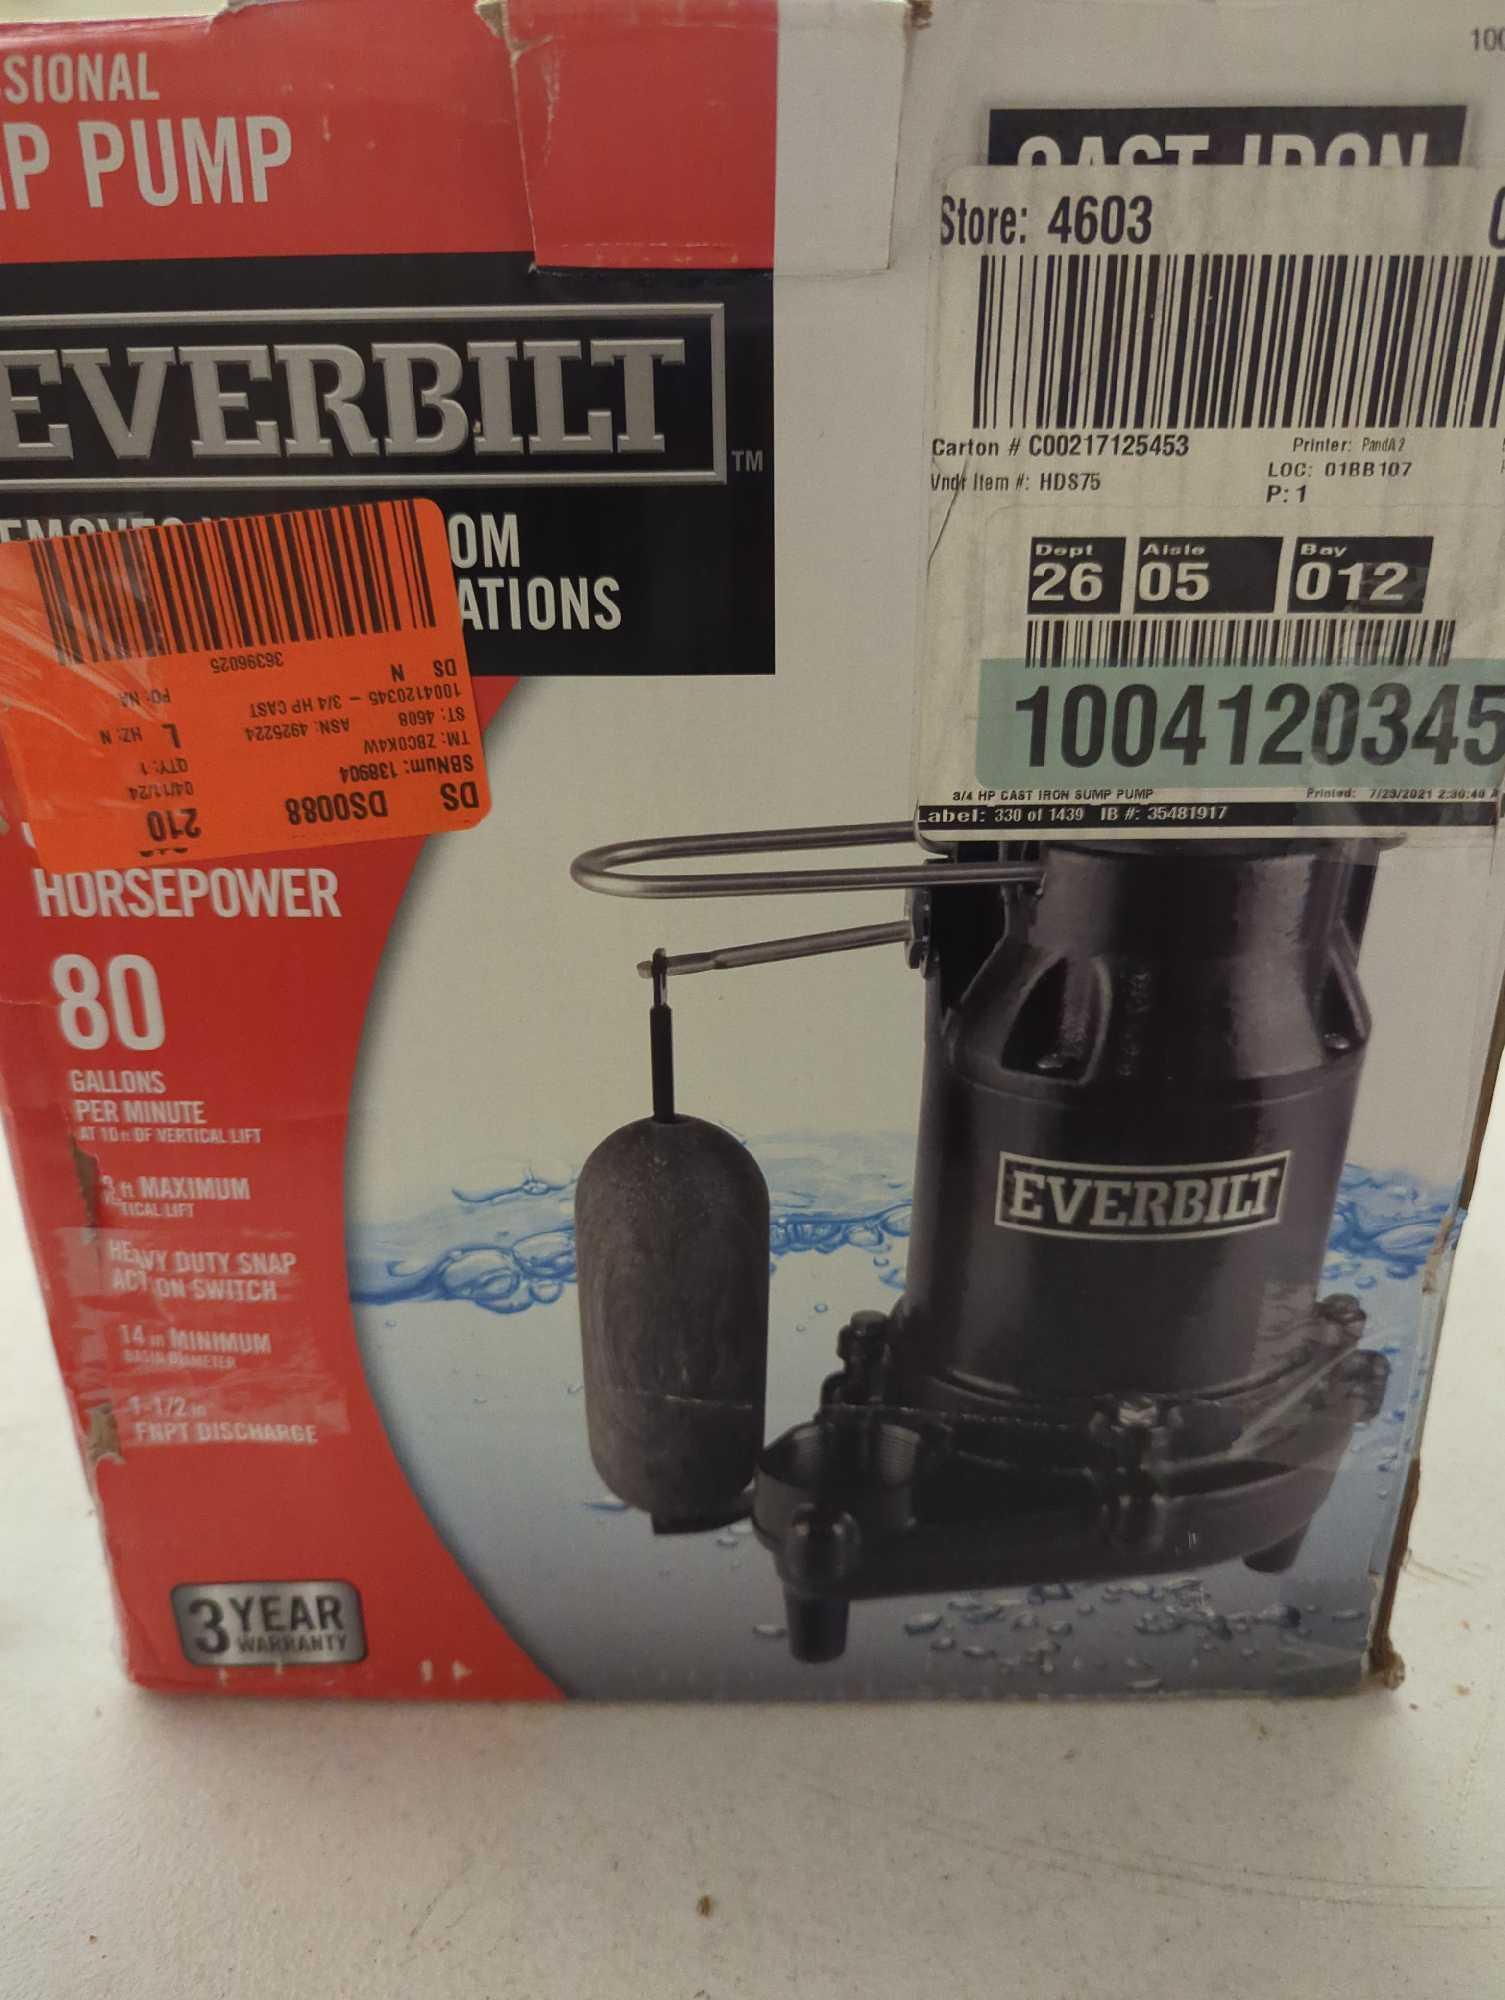 Everbilt 3/4 HP Pro Snap Action Sump Pump, Appears to be Heavily Used Has Rusting And Some Damage